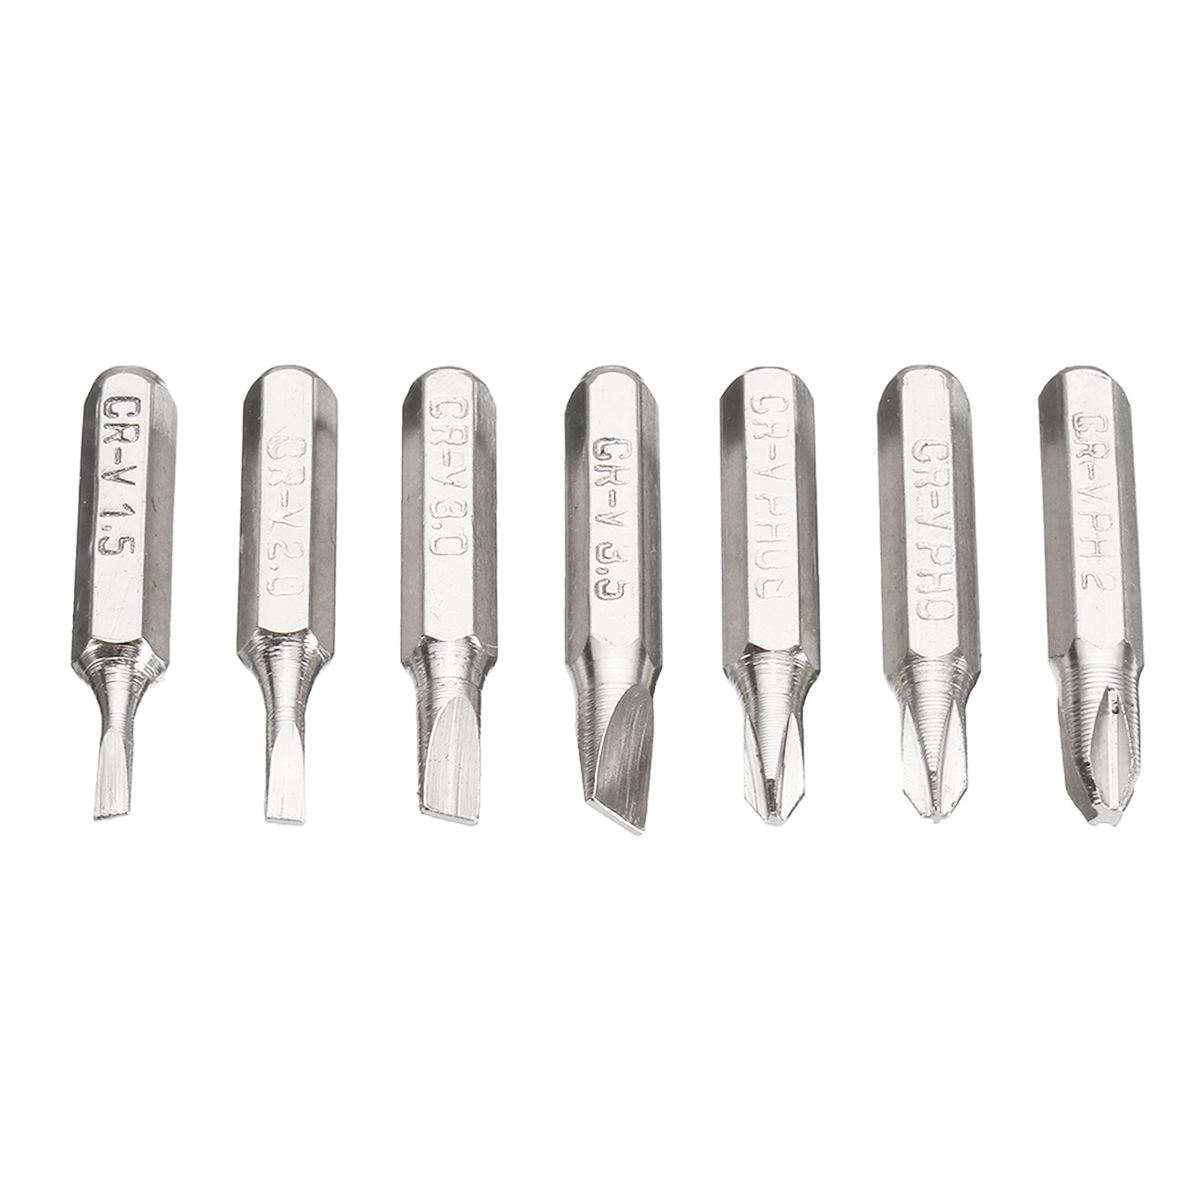 8-in-1-Pen-Style-Precision-Pocket-Screwdriver-Bit-Set-Slotted-Phillips-Screw-1107792-3